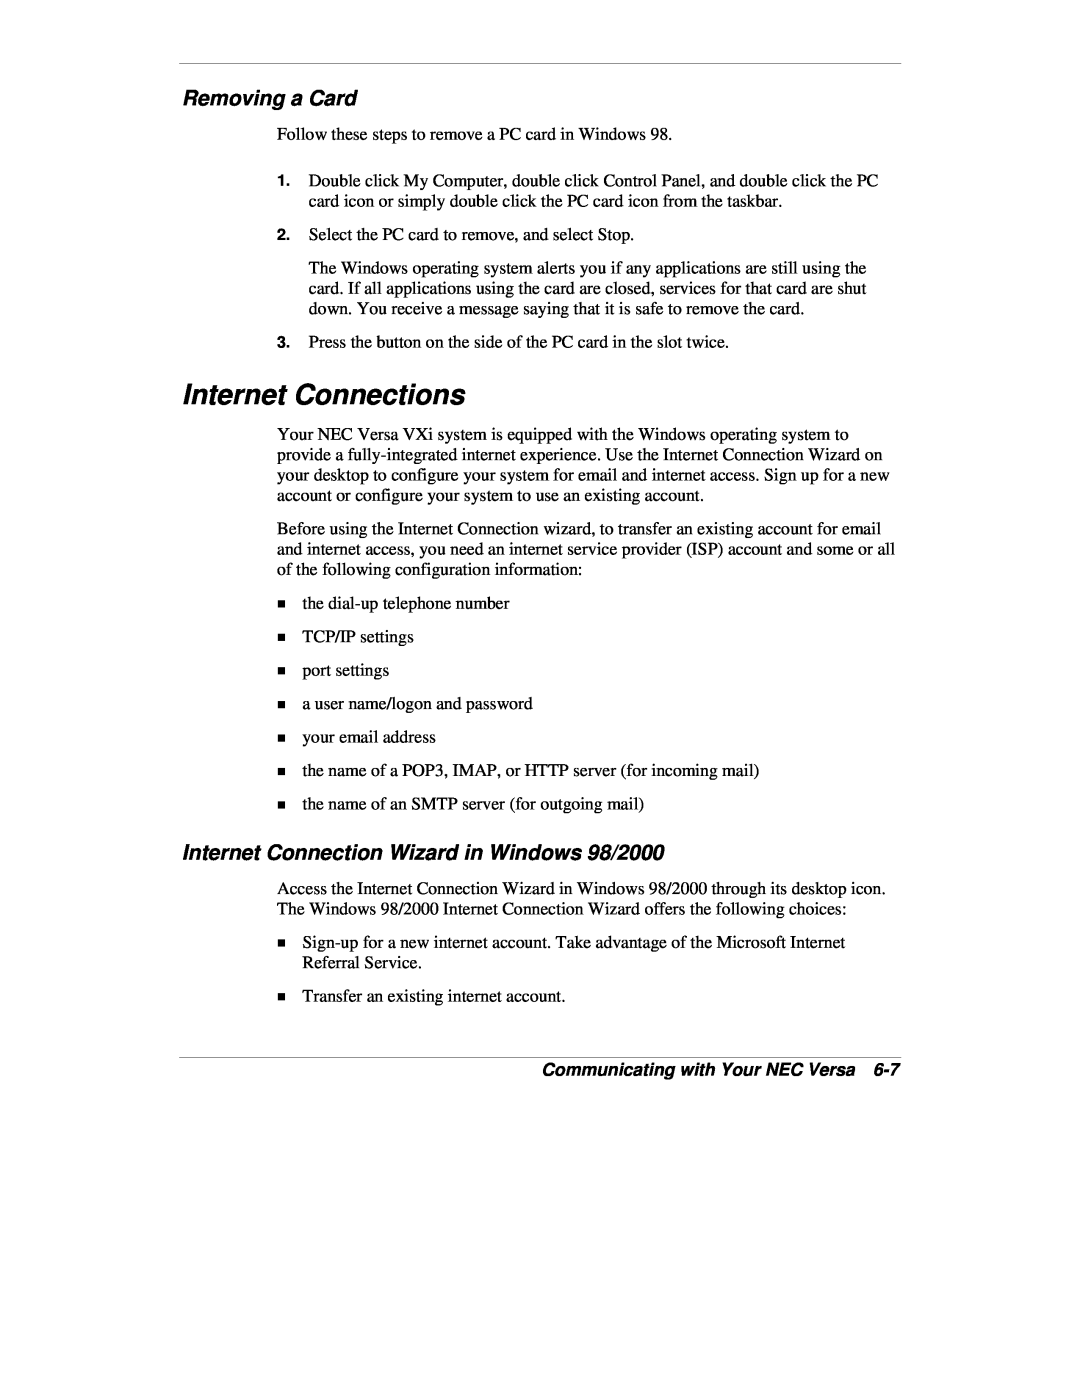 NEC VXi manual Internet Connections, Removing a Card, Internet Connection Wizard in Windows 98/2000 